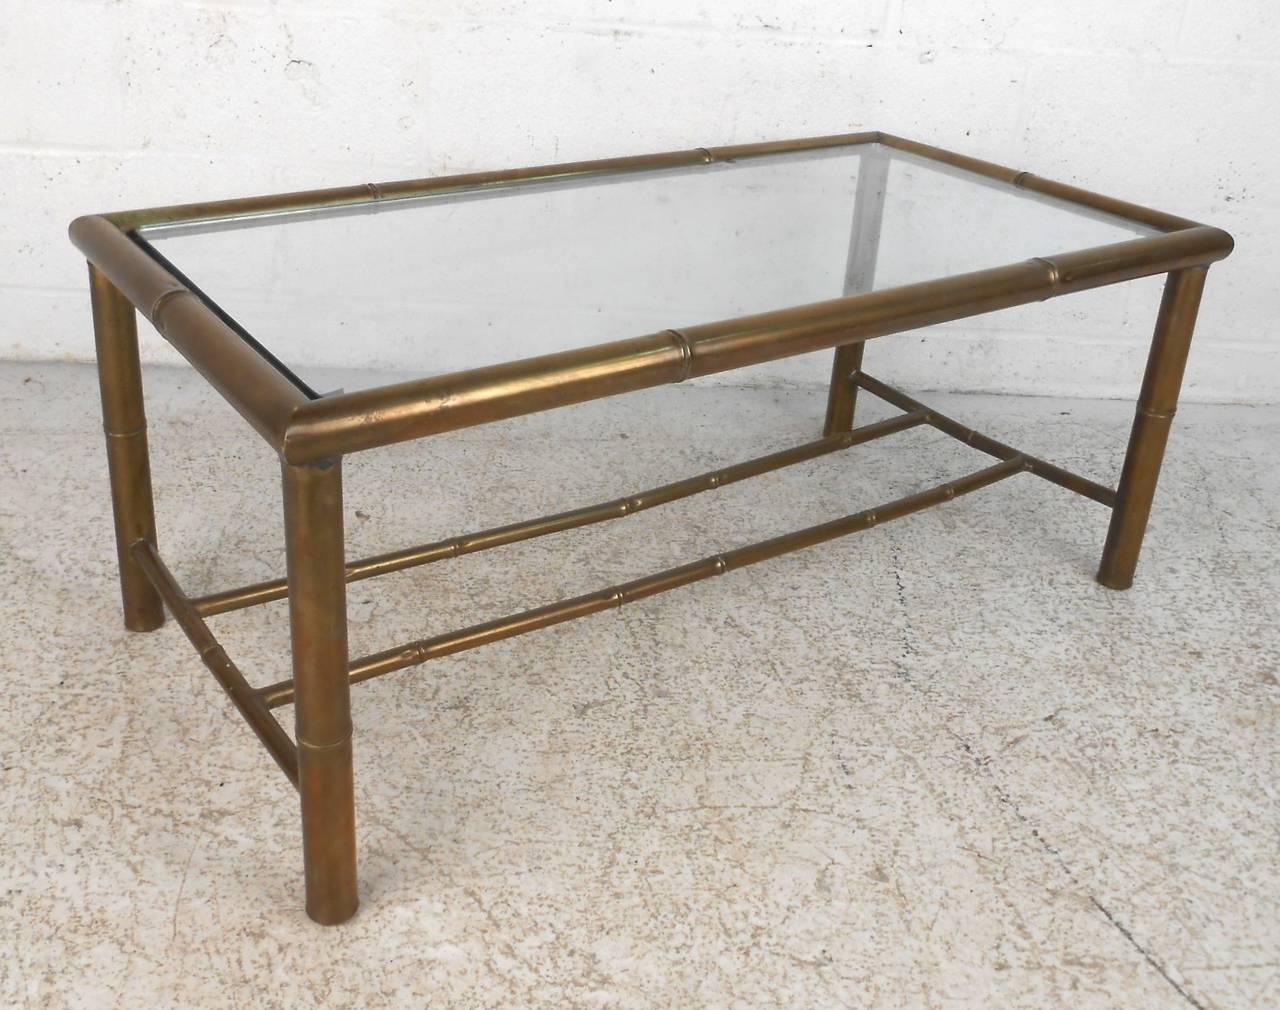 Vintage coffee table in tubular brass with clear glass top. Made in a bamboo style with legs and runners. Natural patina to the brass frame.

(Please confirm item location - NY or NJ - with dealer).